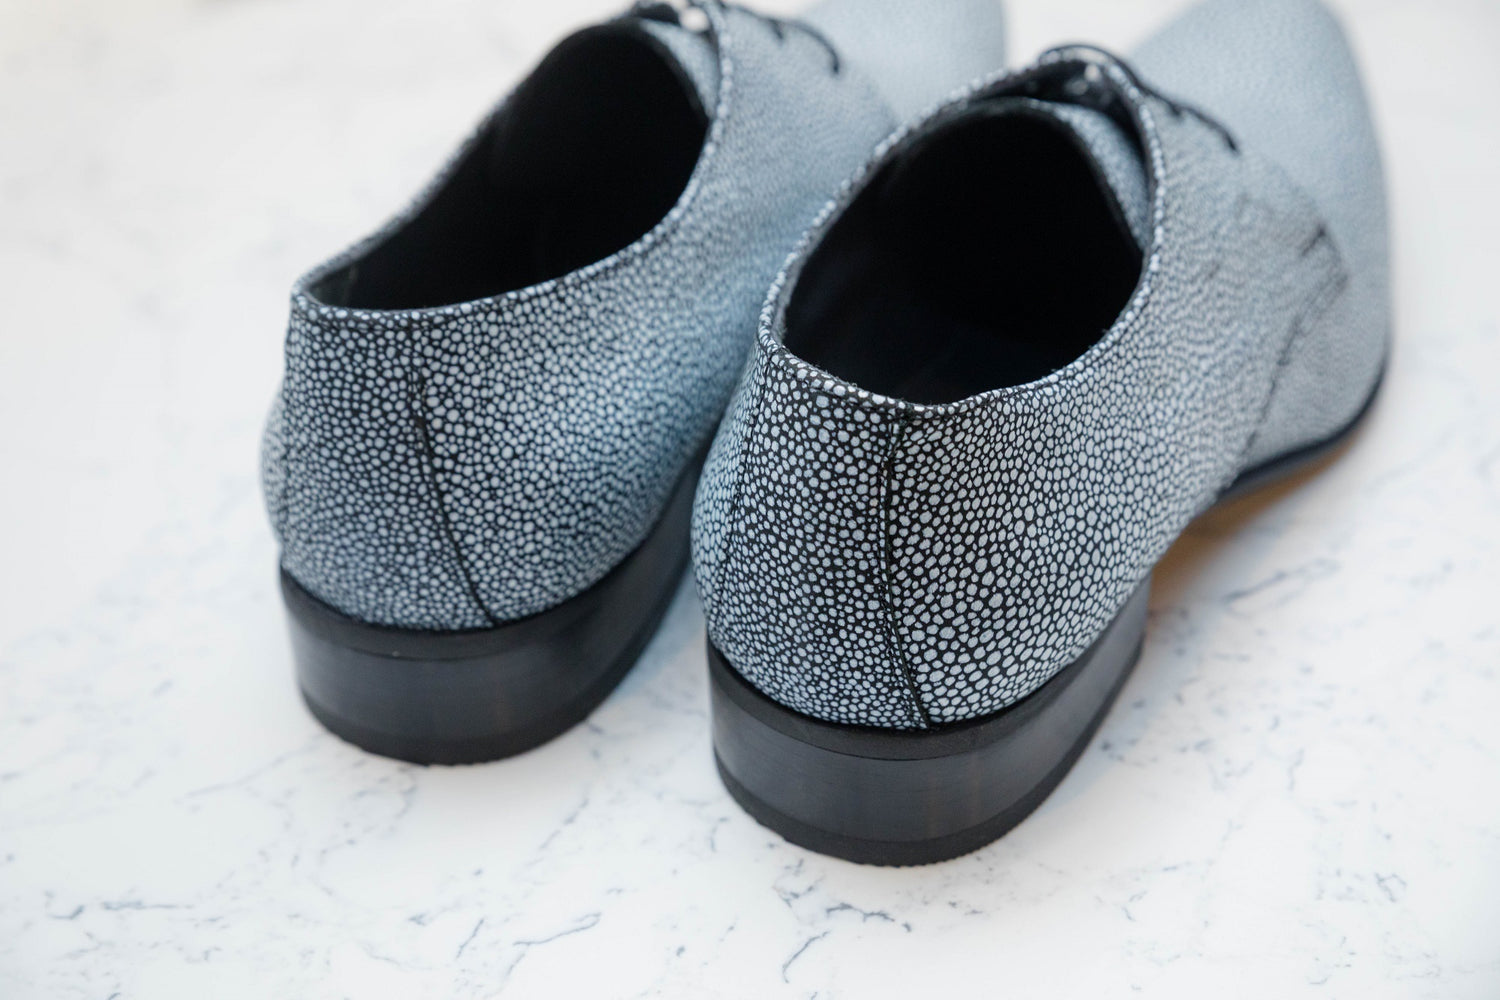 The Stingray Shoes - Shoes by Urbbana